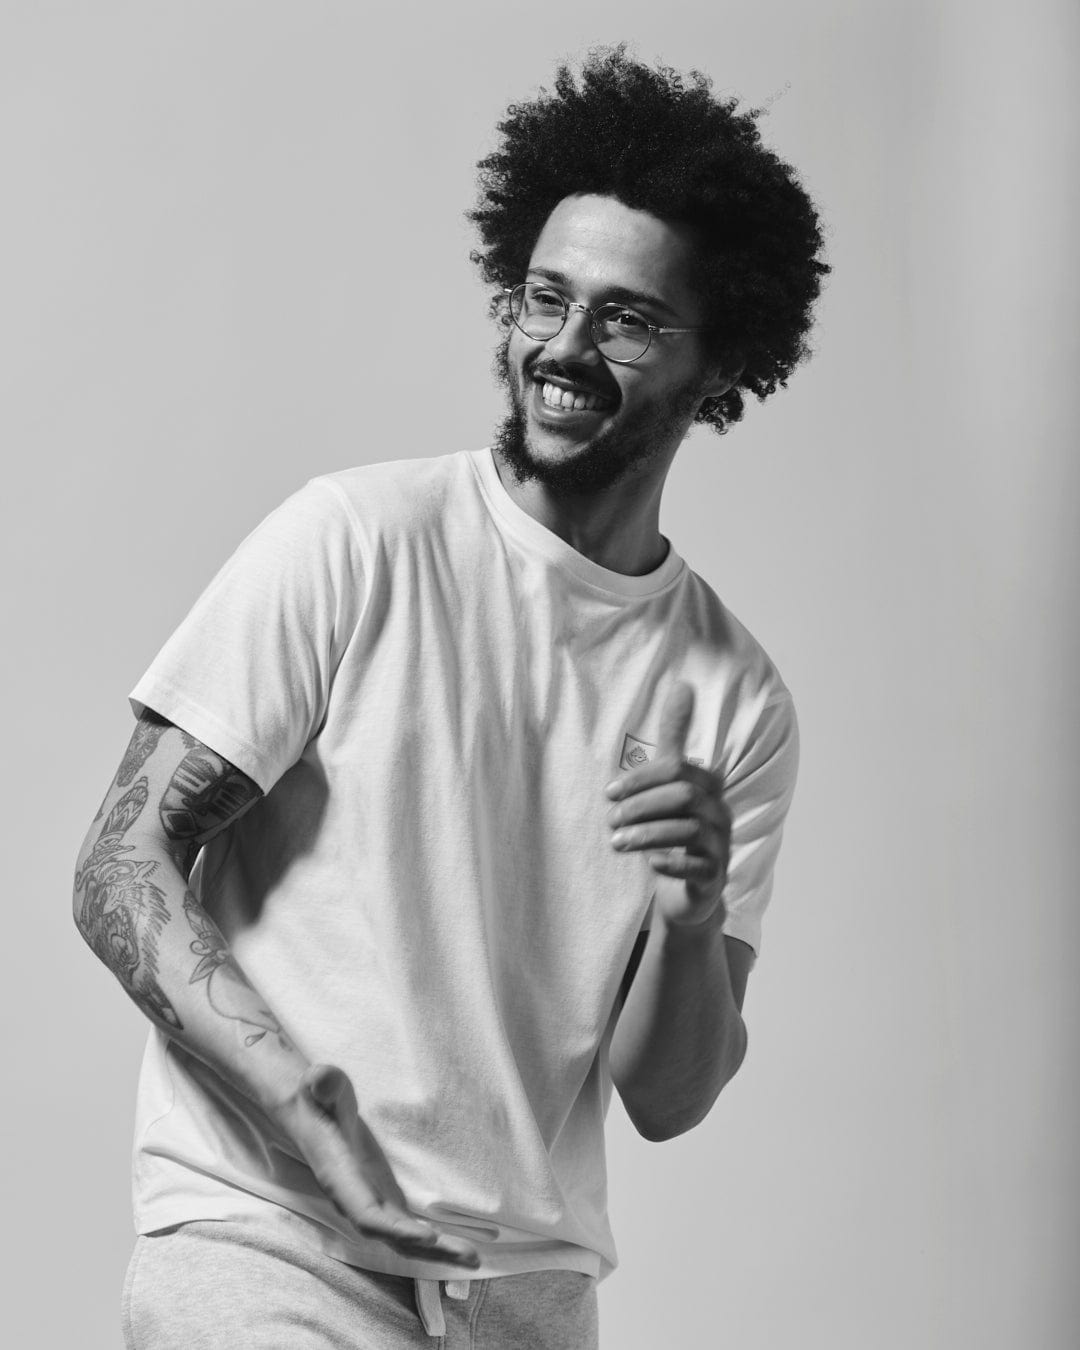 A black and white photo of a man wearing the Saltrock Corp 20 Mens Short Sleeve T-Shirt in Charcoal, with afro hair and tattoos showcasing his unique style.